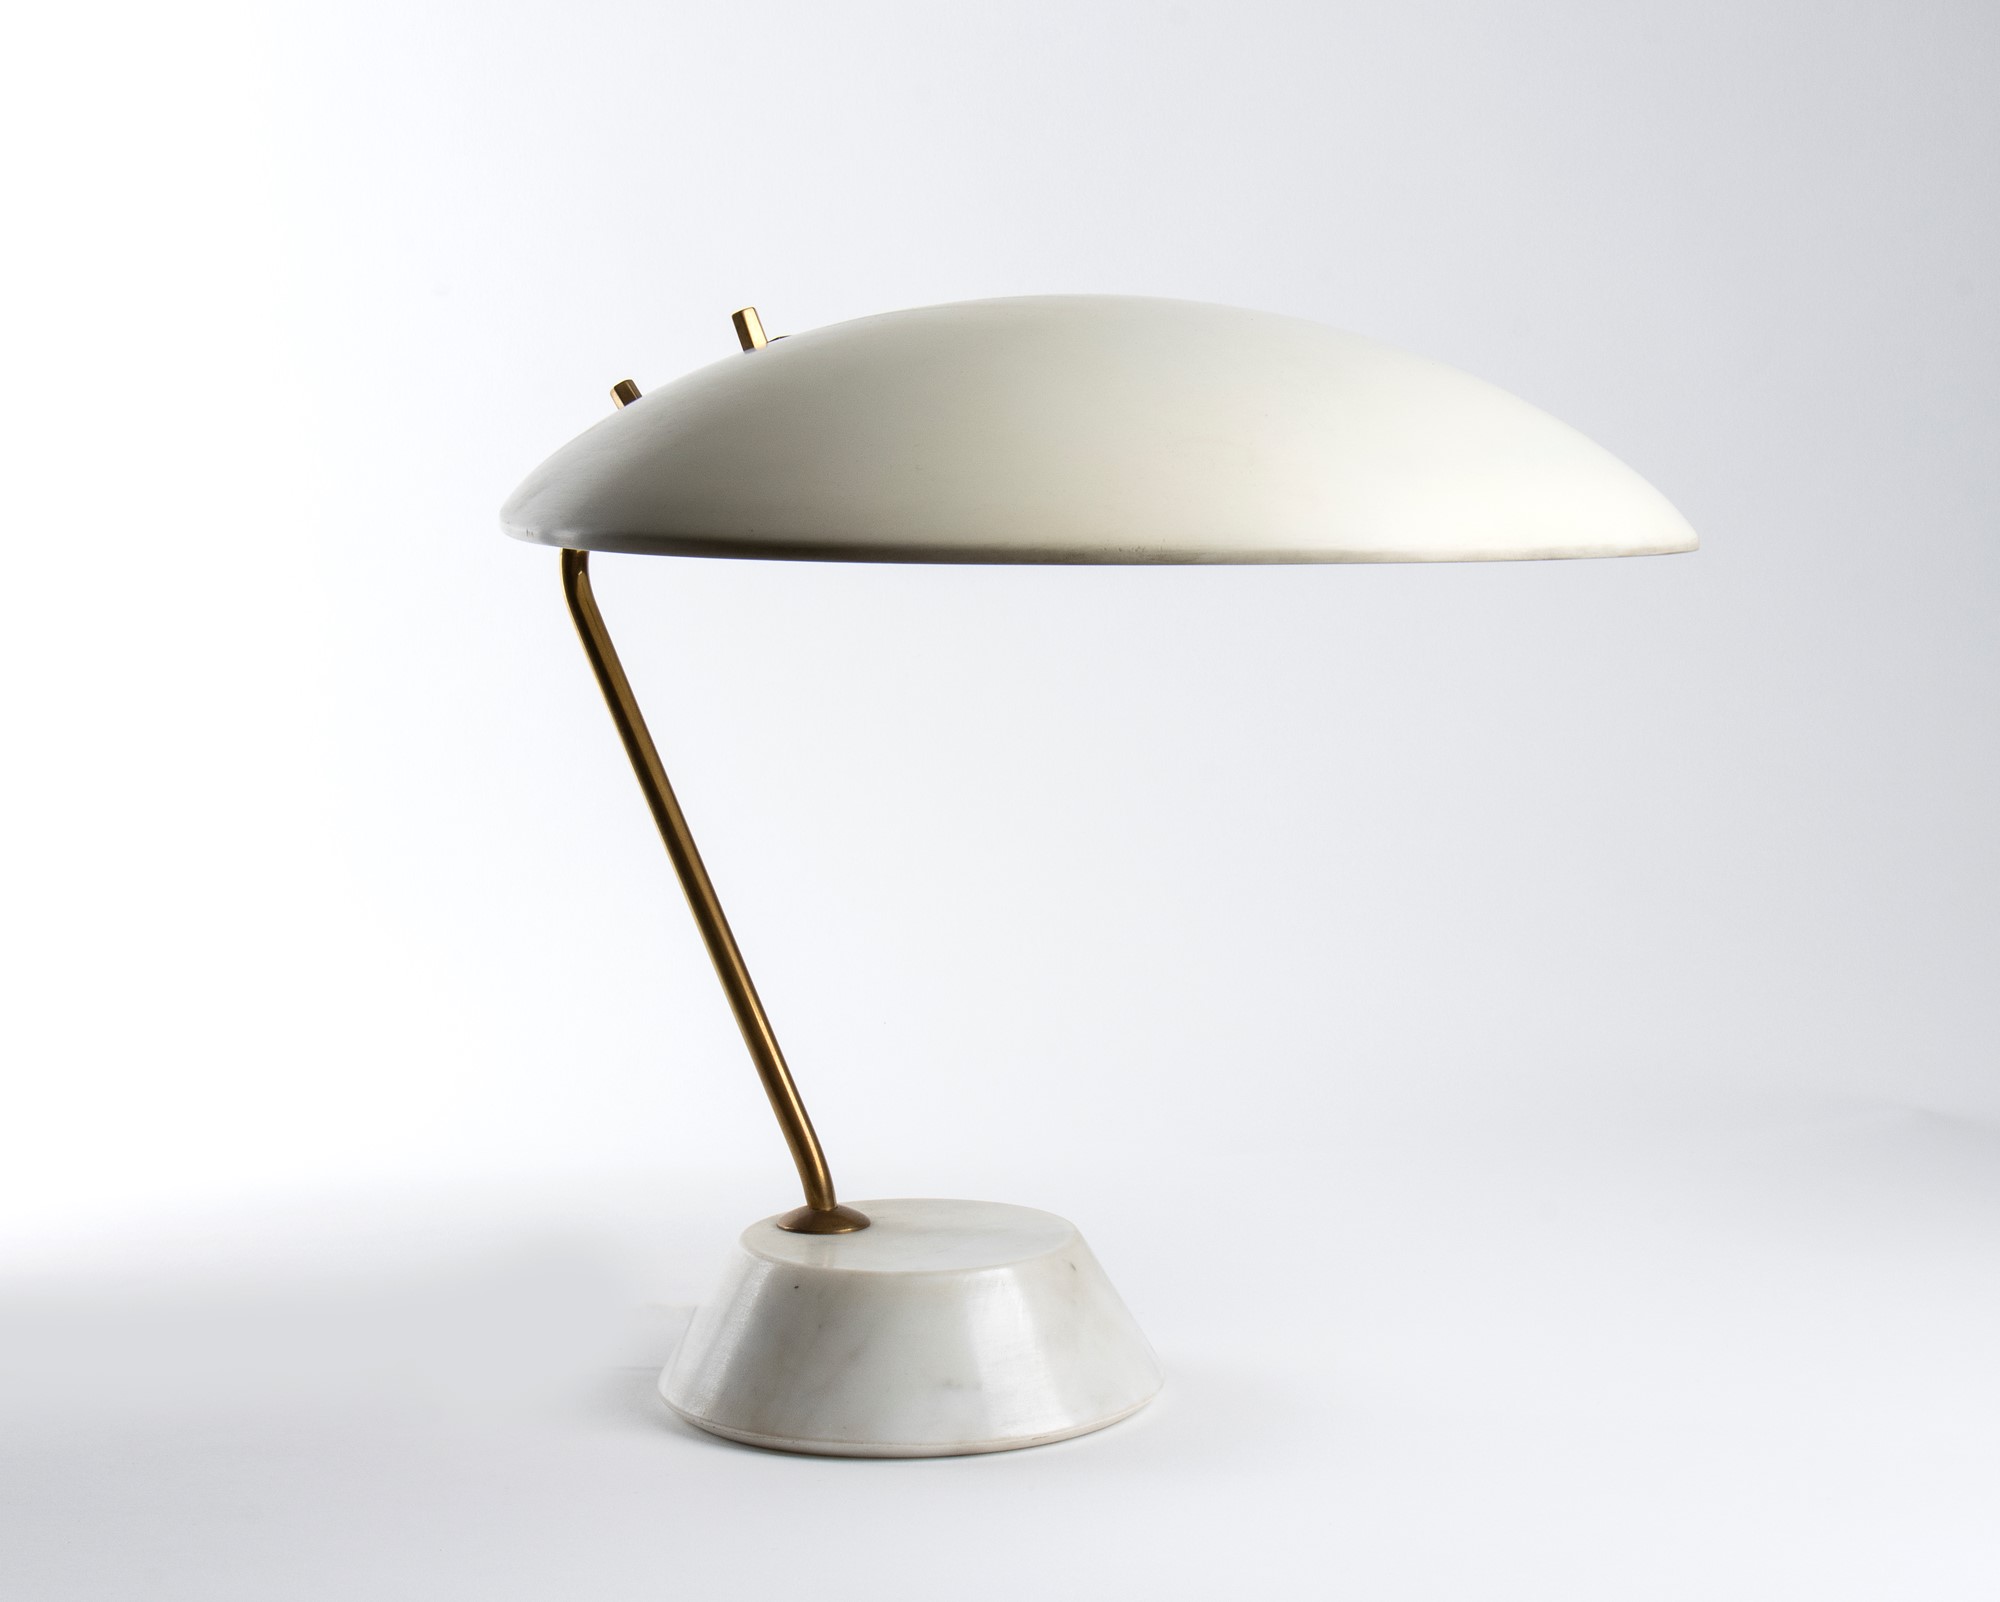 Bruno Gatta Table lamp model 8023 with a light. Cream white metal diffuser, brass stem and marble c - Image 3 of 19